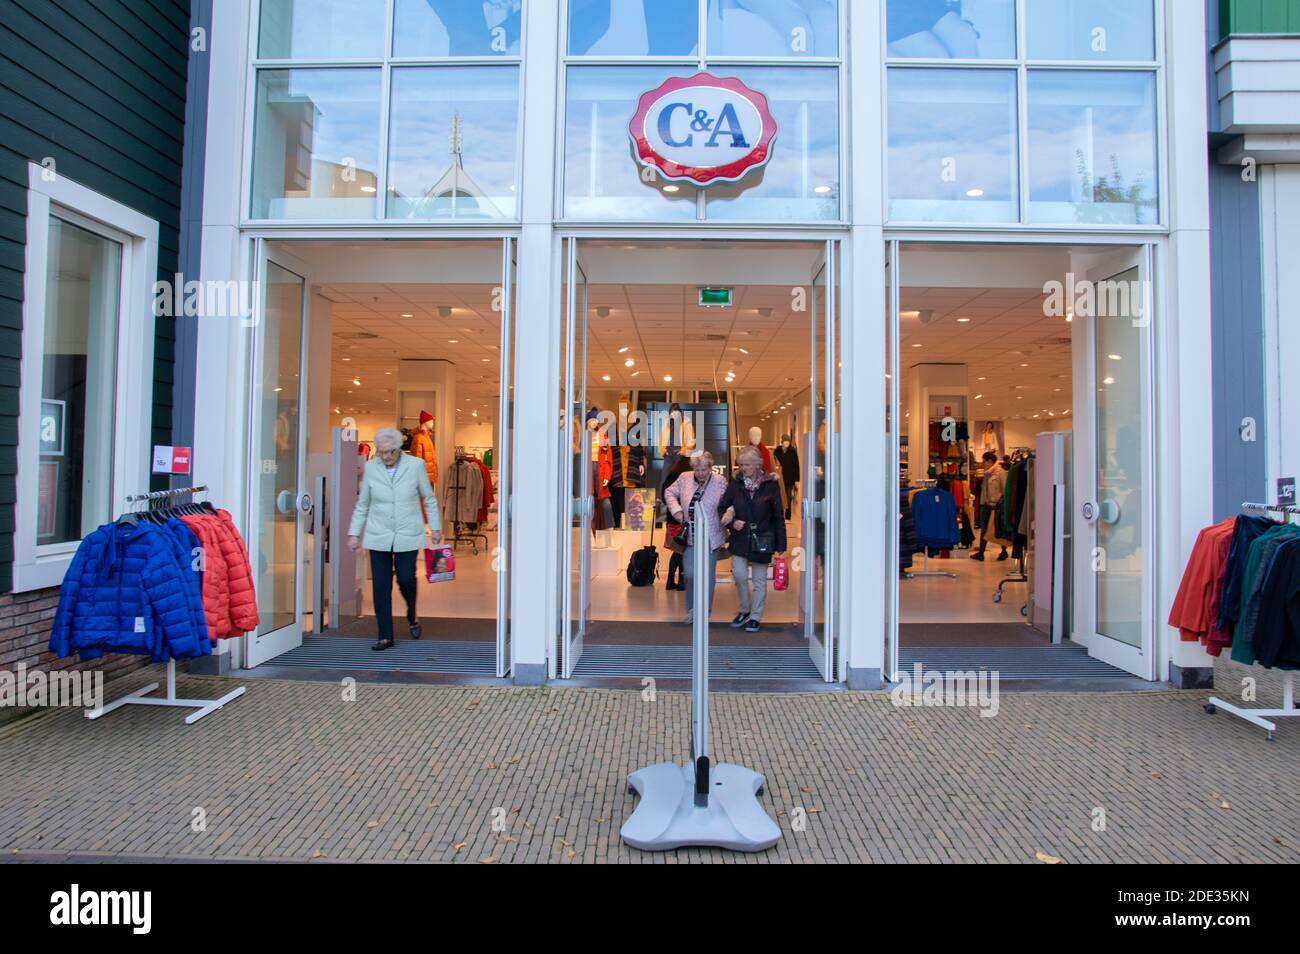 Store At The Netherlands 23-10-2019 Stock Photo